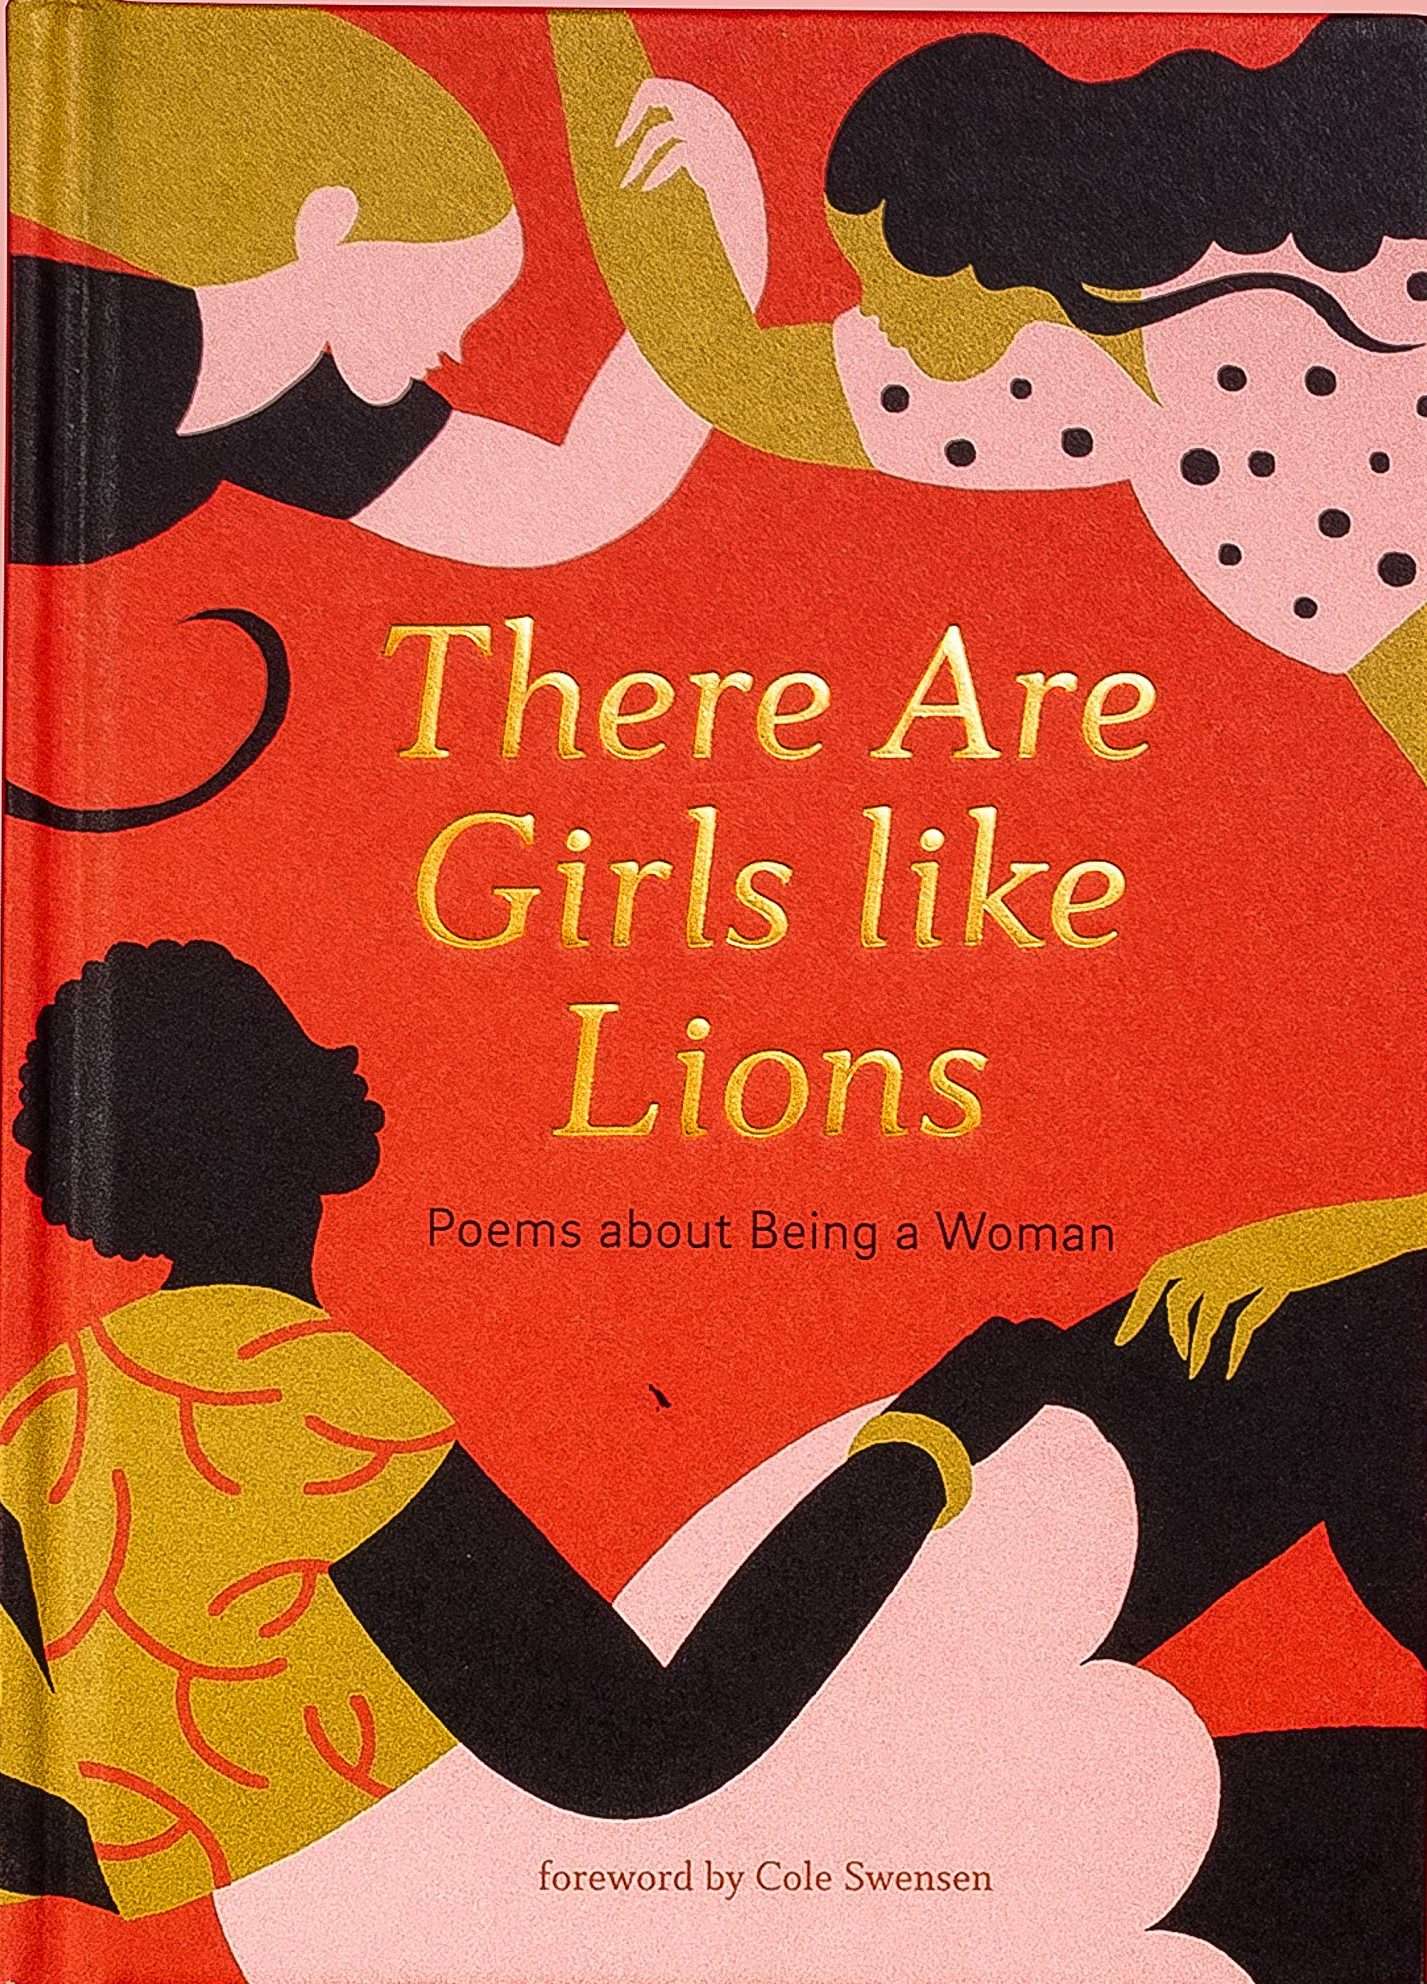 Book review: There Are Girls Like Lions » MadebyPernille